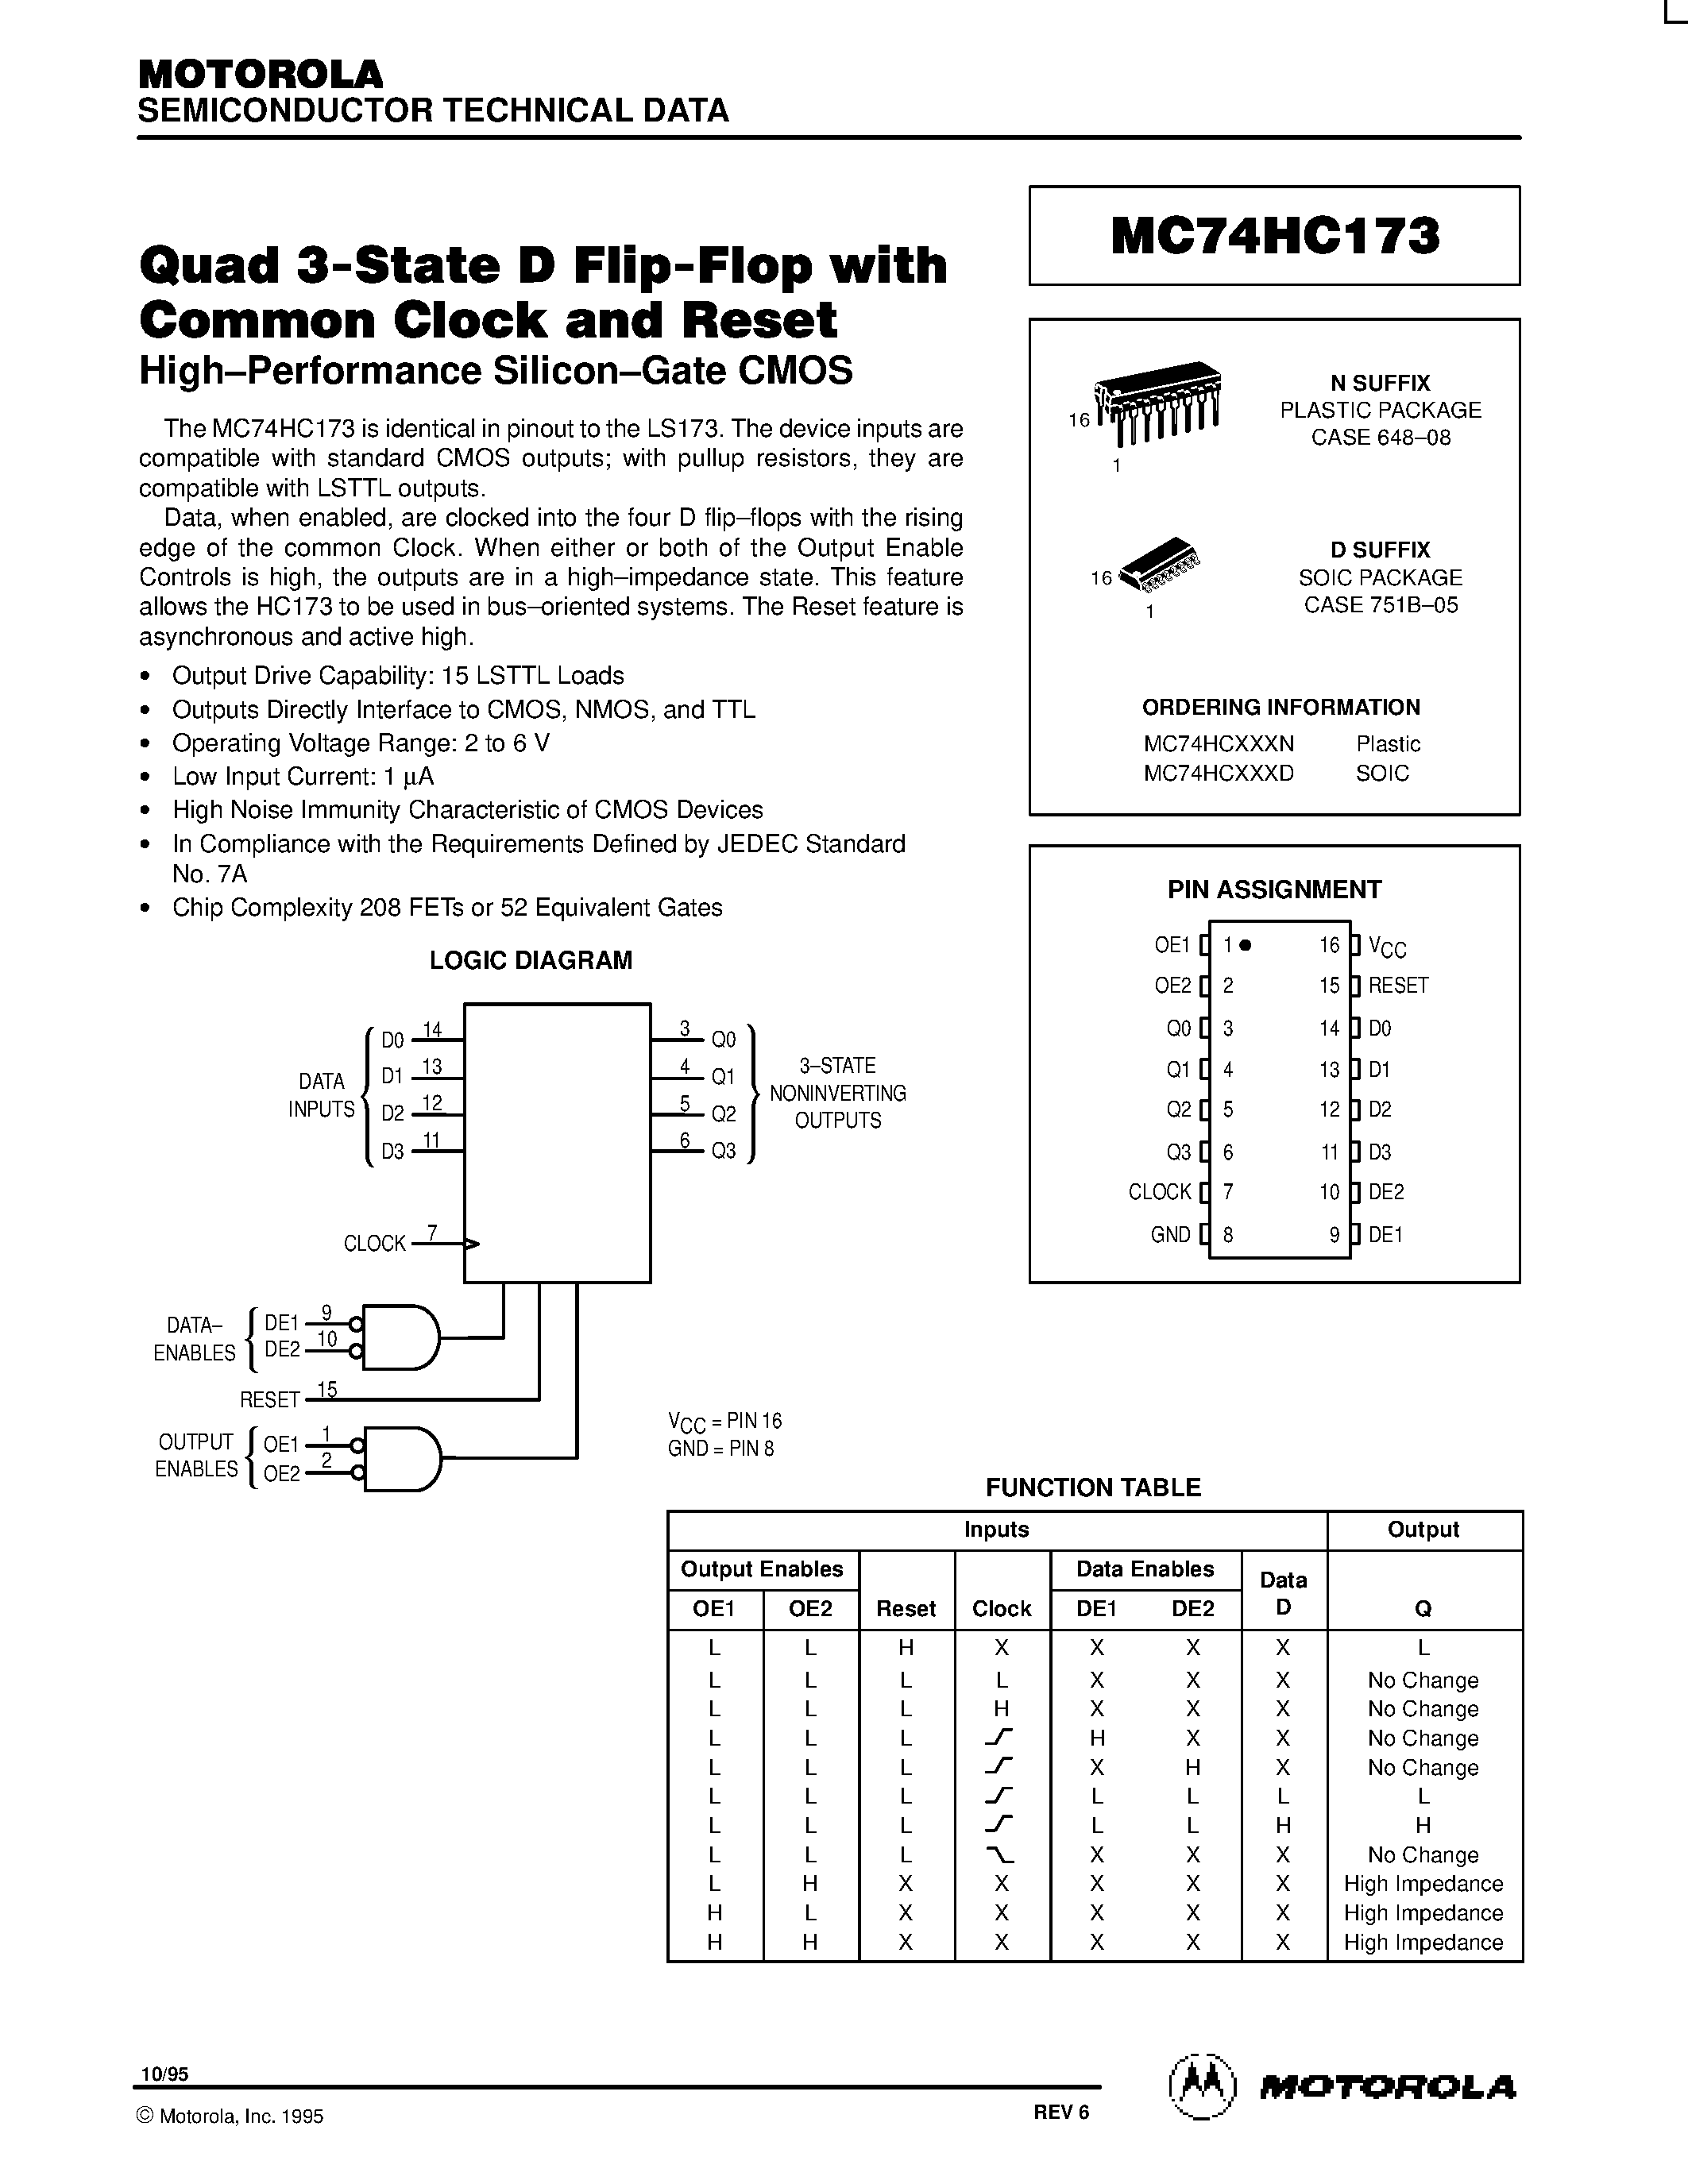 Datasheet 74173 - Quad 3-State D Flip-Flop with Common Clock and Reset page 1